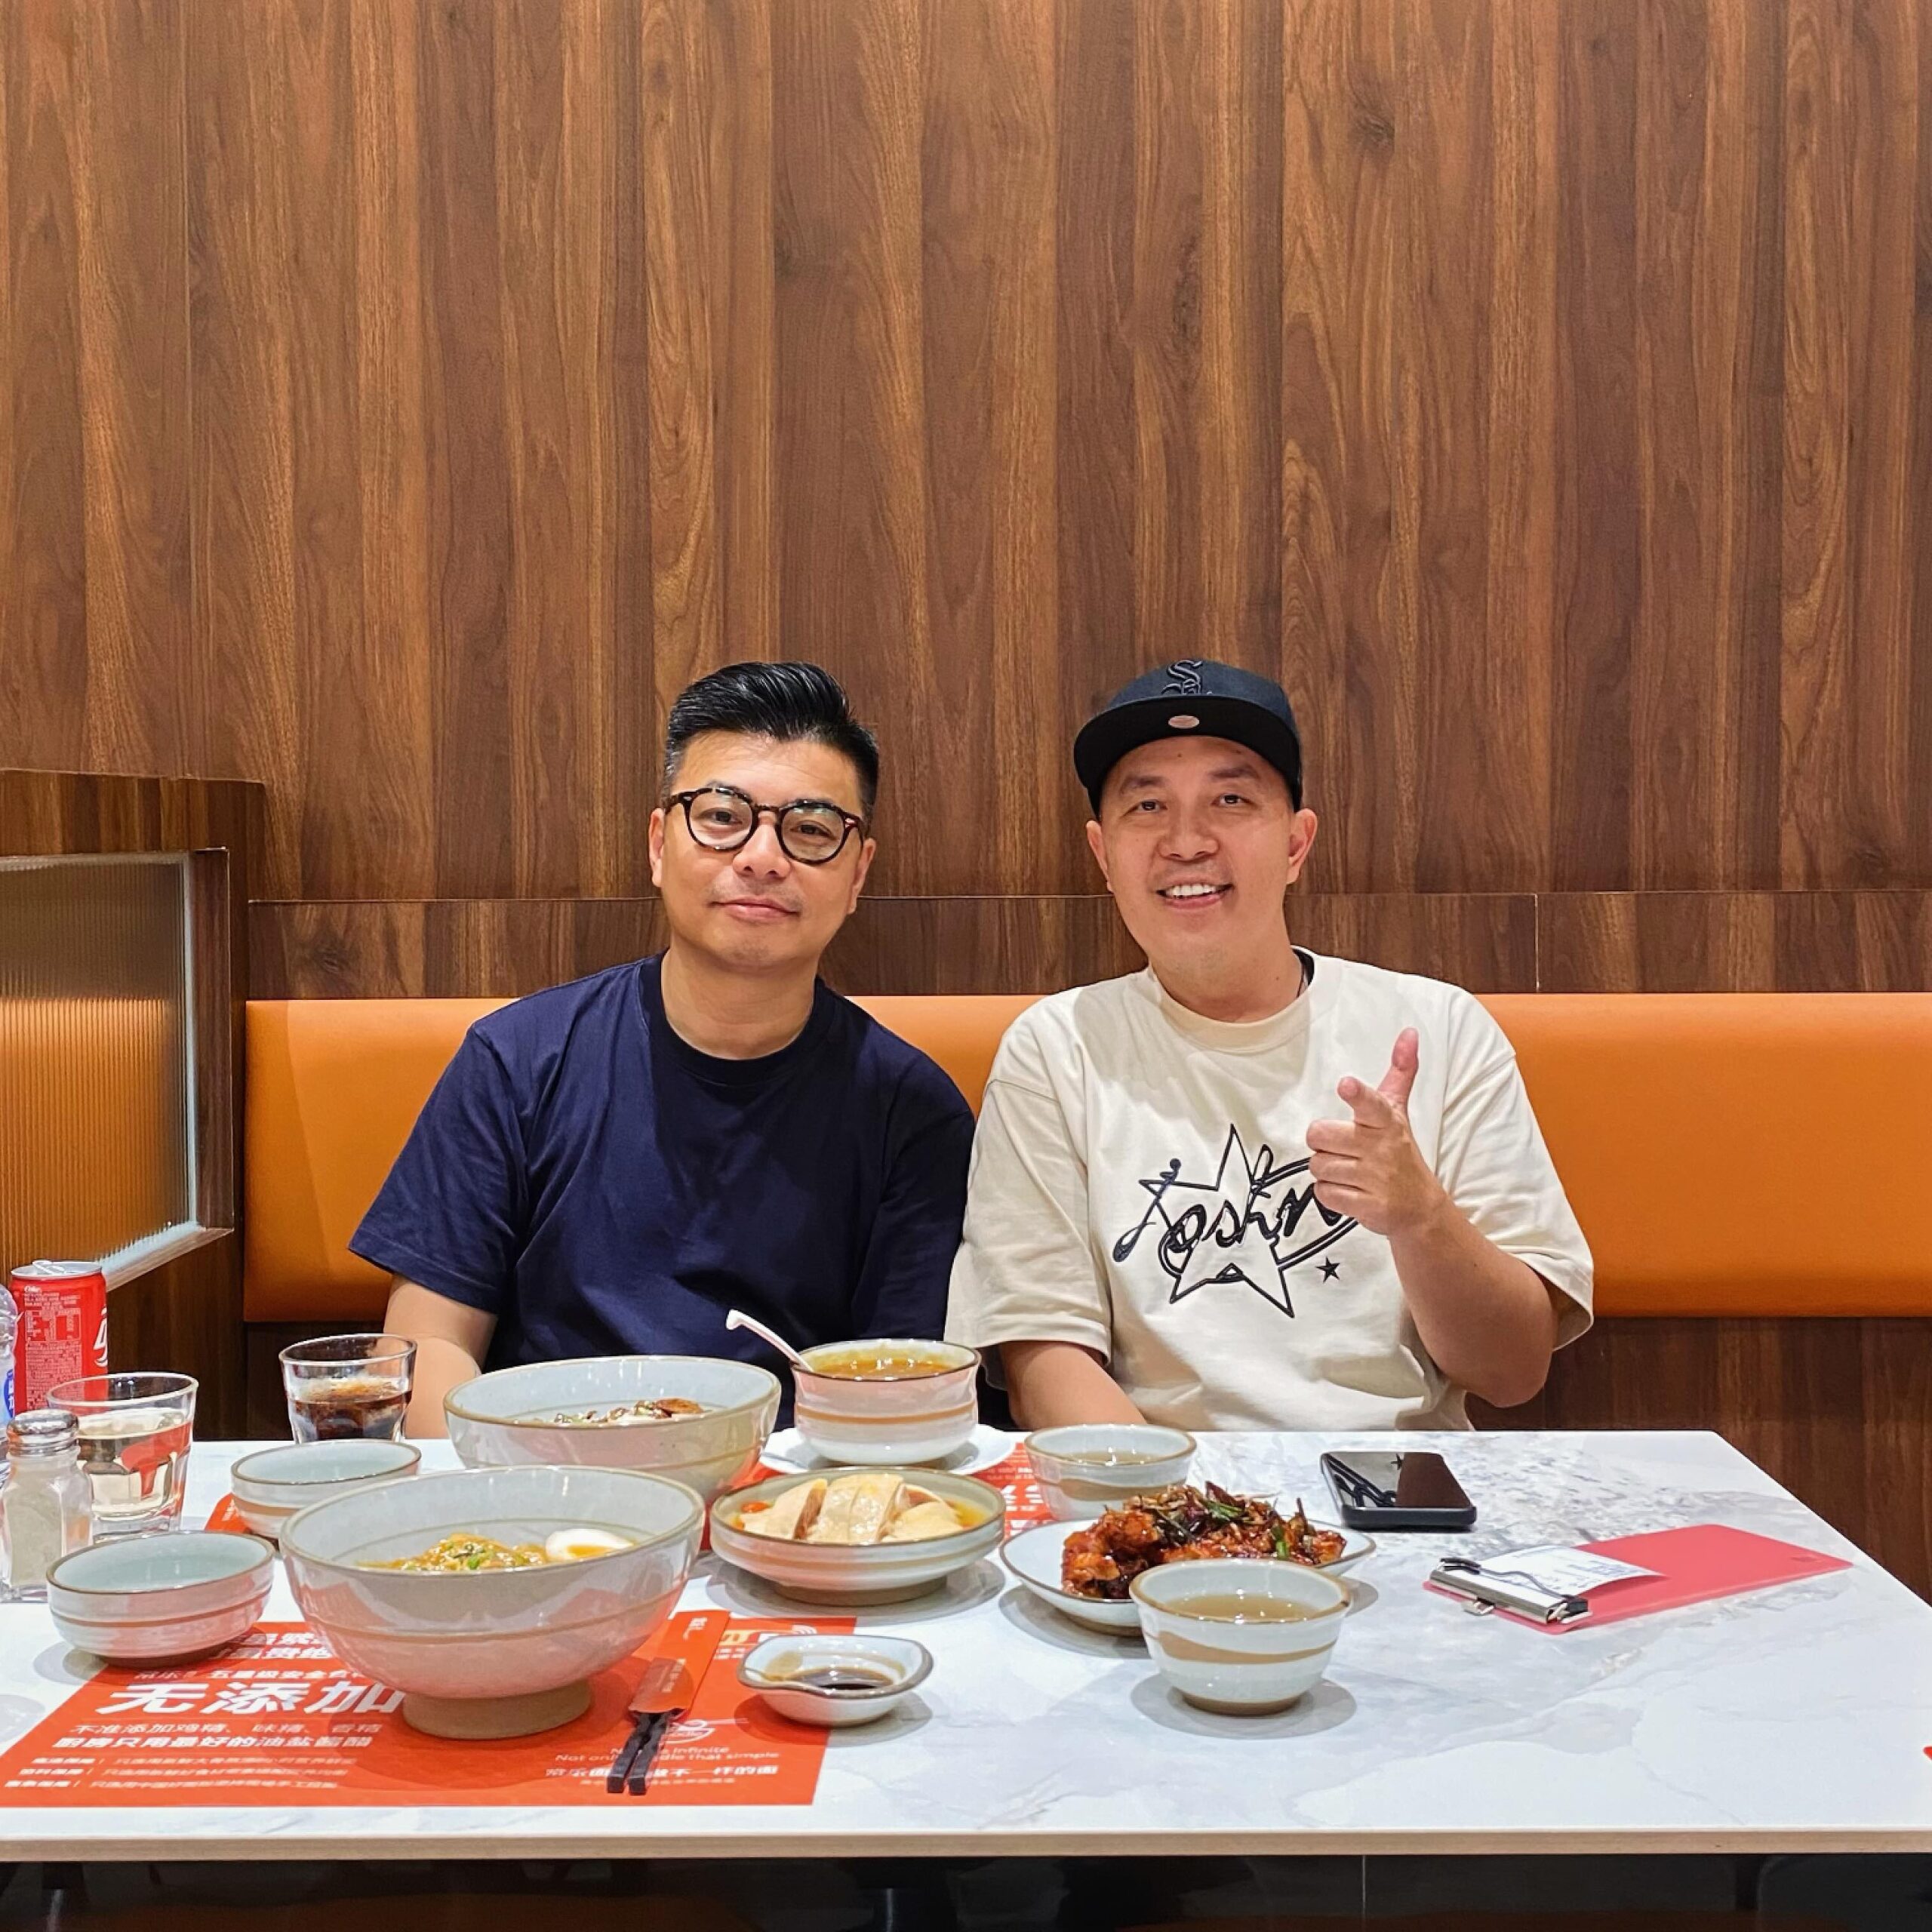 It’s great to 康师傅 tonight. Found out that he loves Shanghai food much!